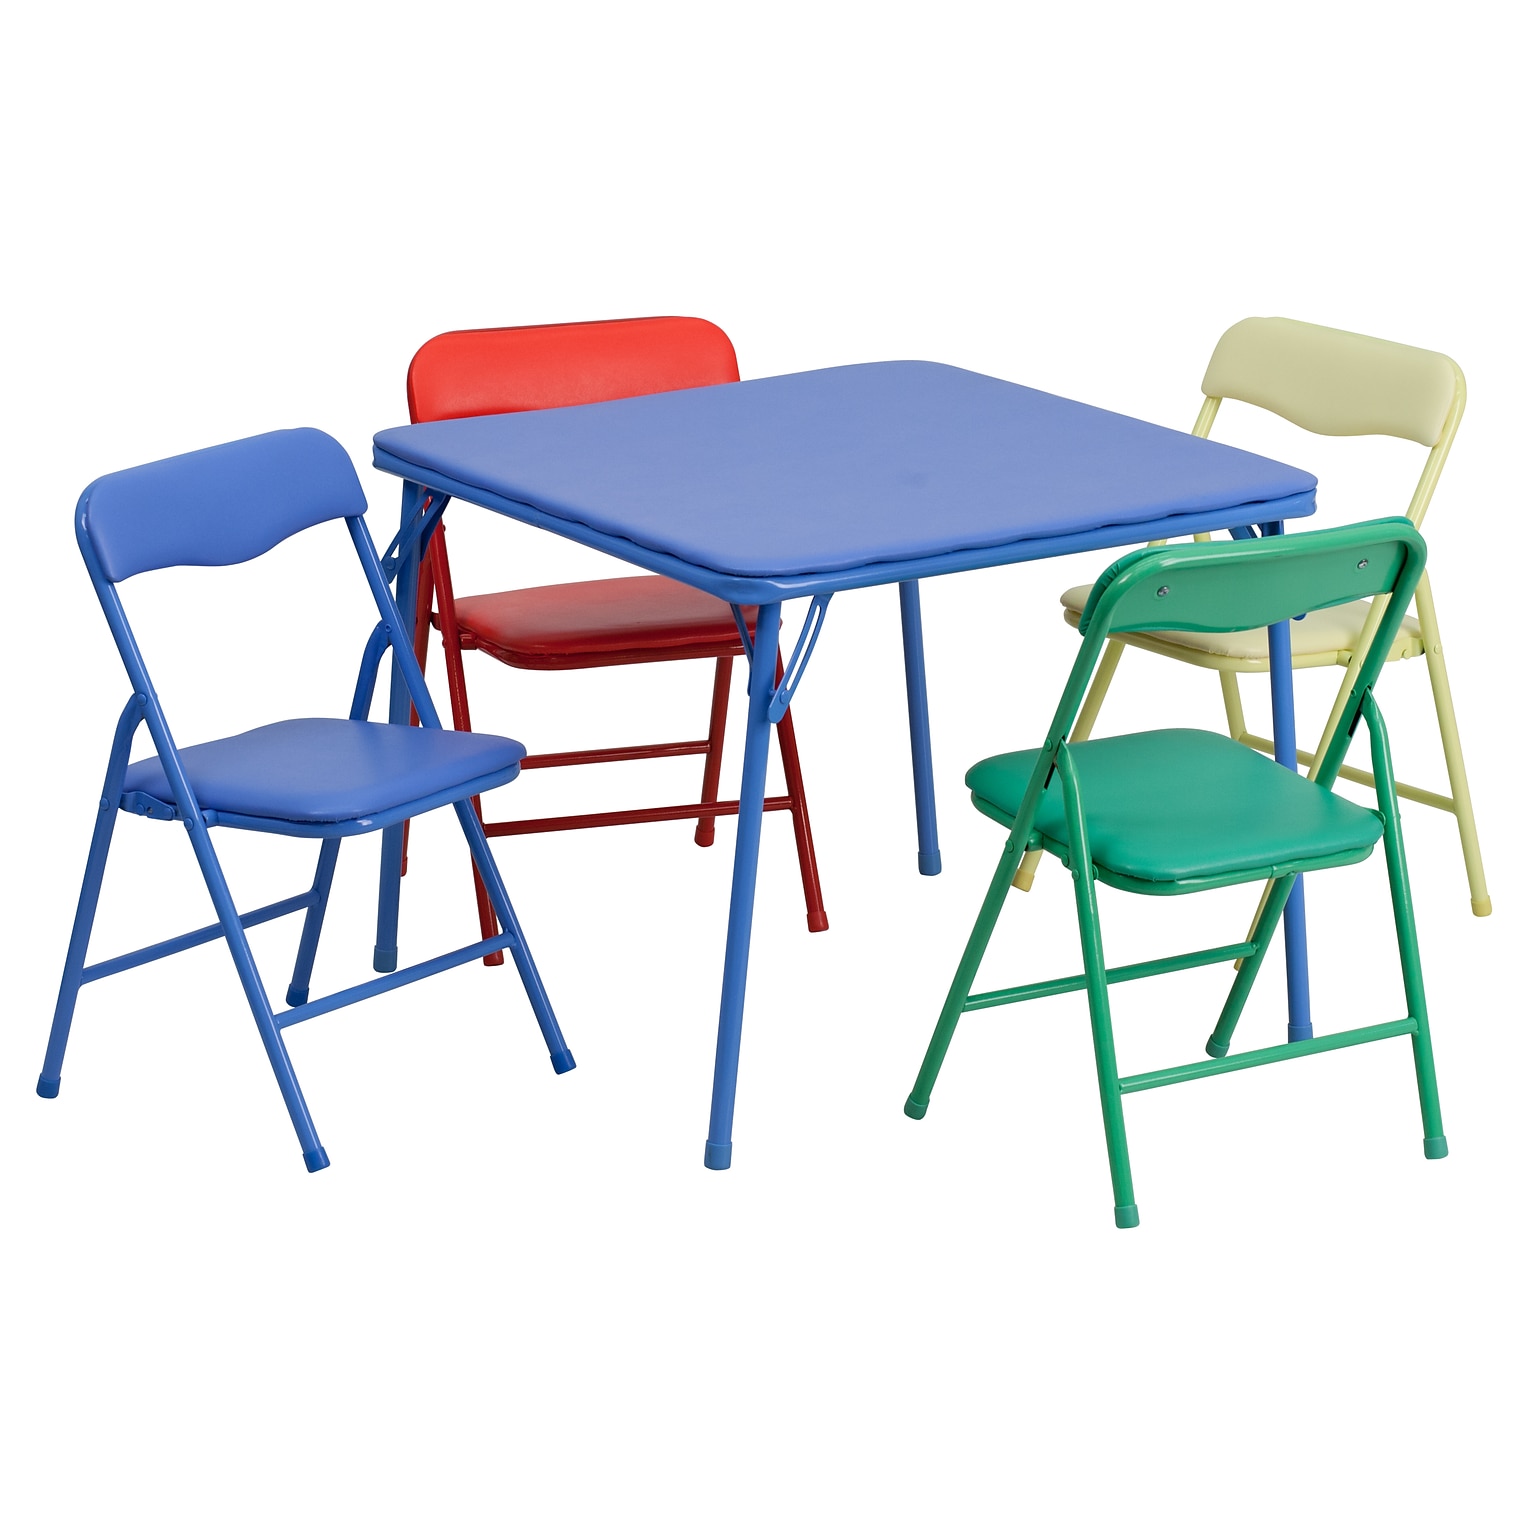 Flash Furniture Mindy Square Kids 5 Piece Folding Table and Chair Set, 24 x 24, Multicolored (JB9KID)